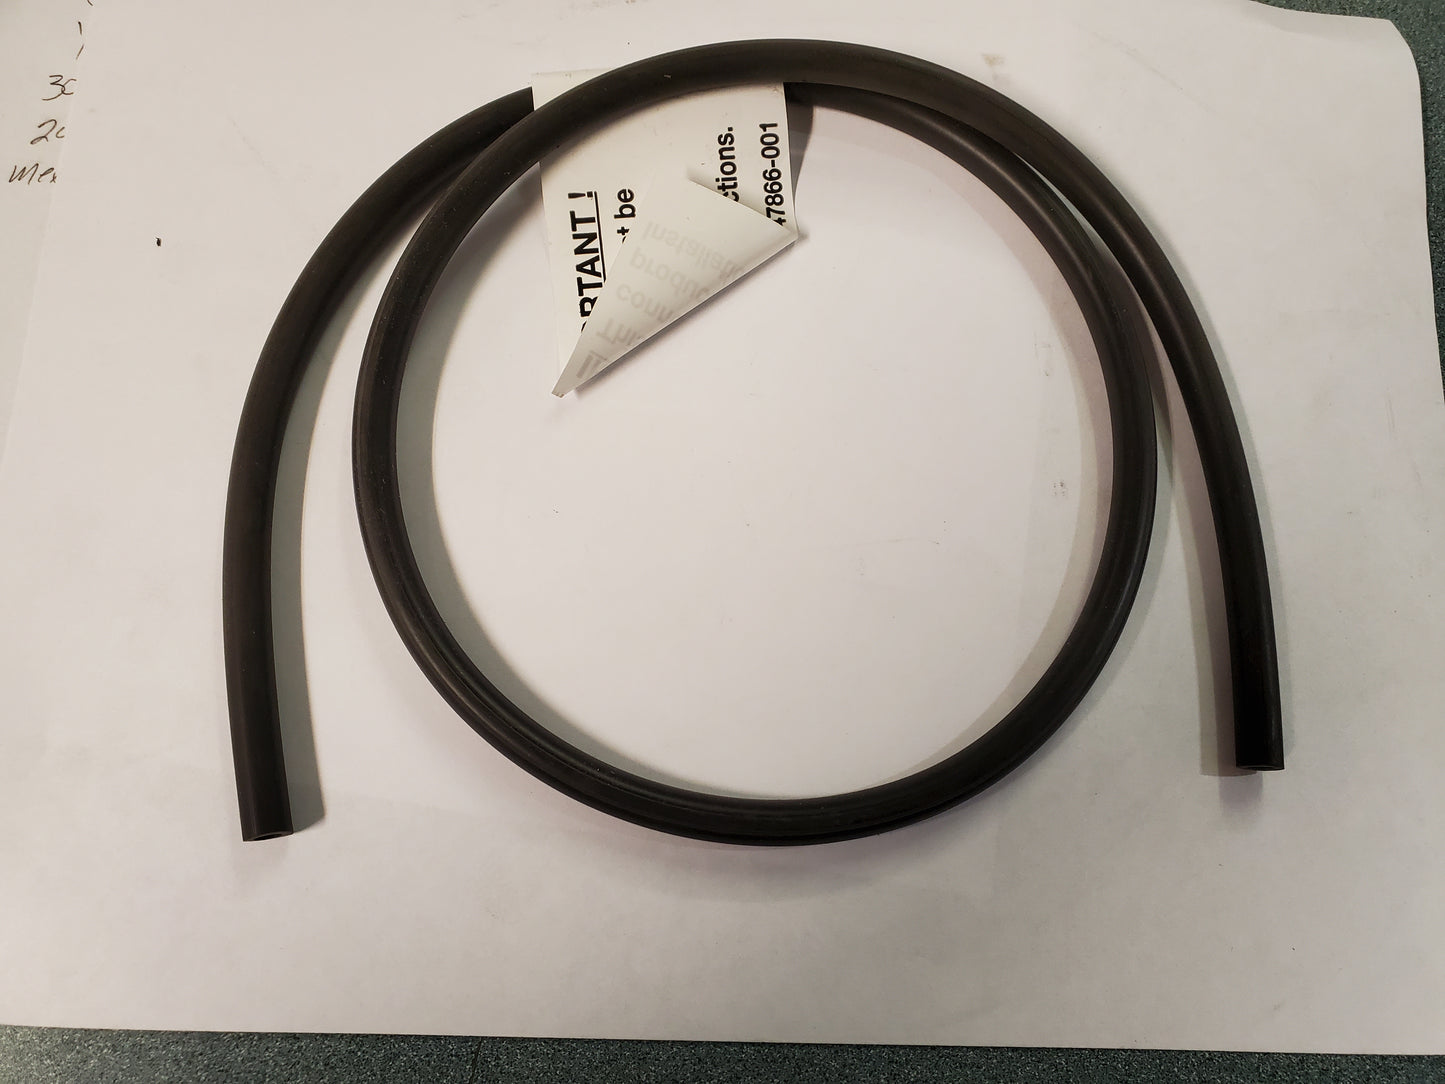 34" SILICON TUBING WITH LABEL